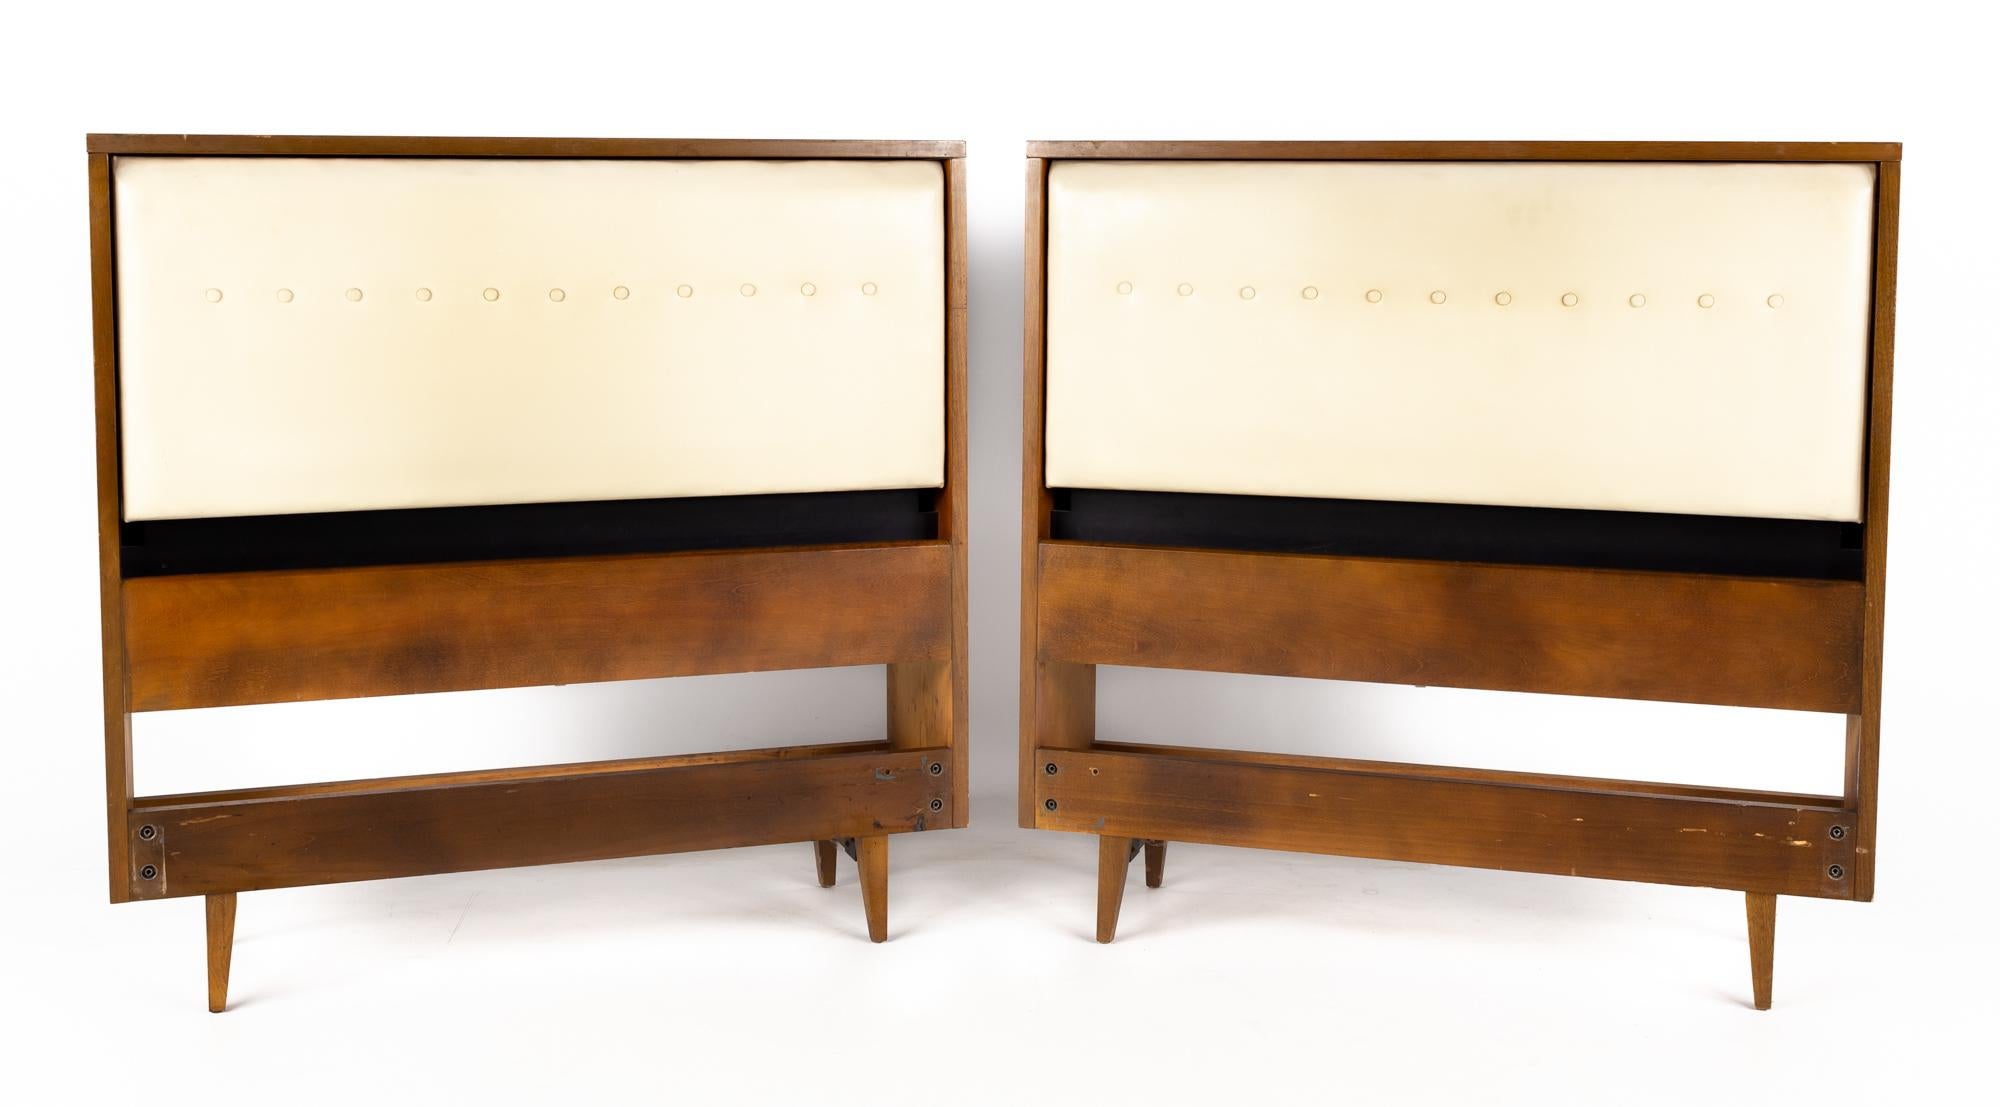 George Nelson for Herman Miller Primavera mid-century twin walnut storage headboards - a pair

Each headboard measures: 40 wide x 12.5 deep x 39.75 inches high

All pieces of furniture can be had in what we call restored vintage condition. That